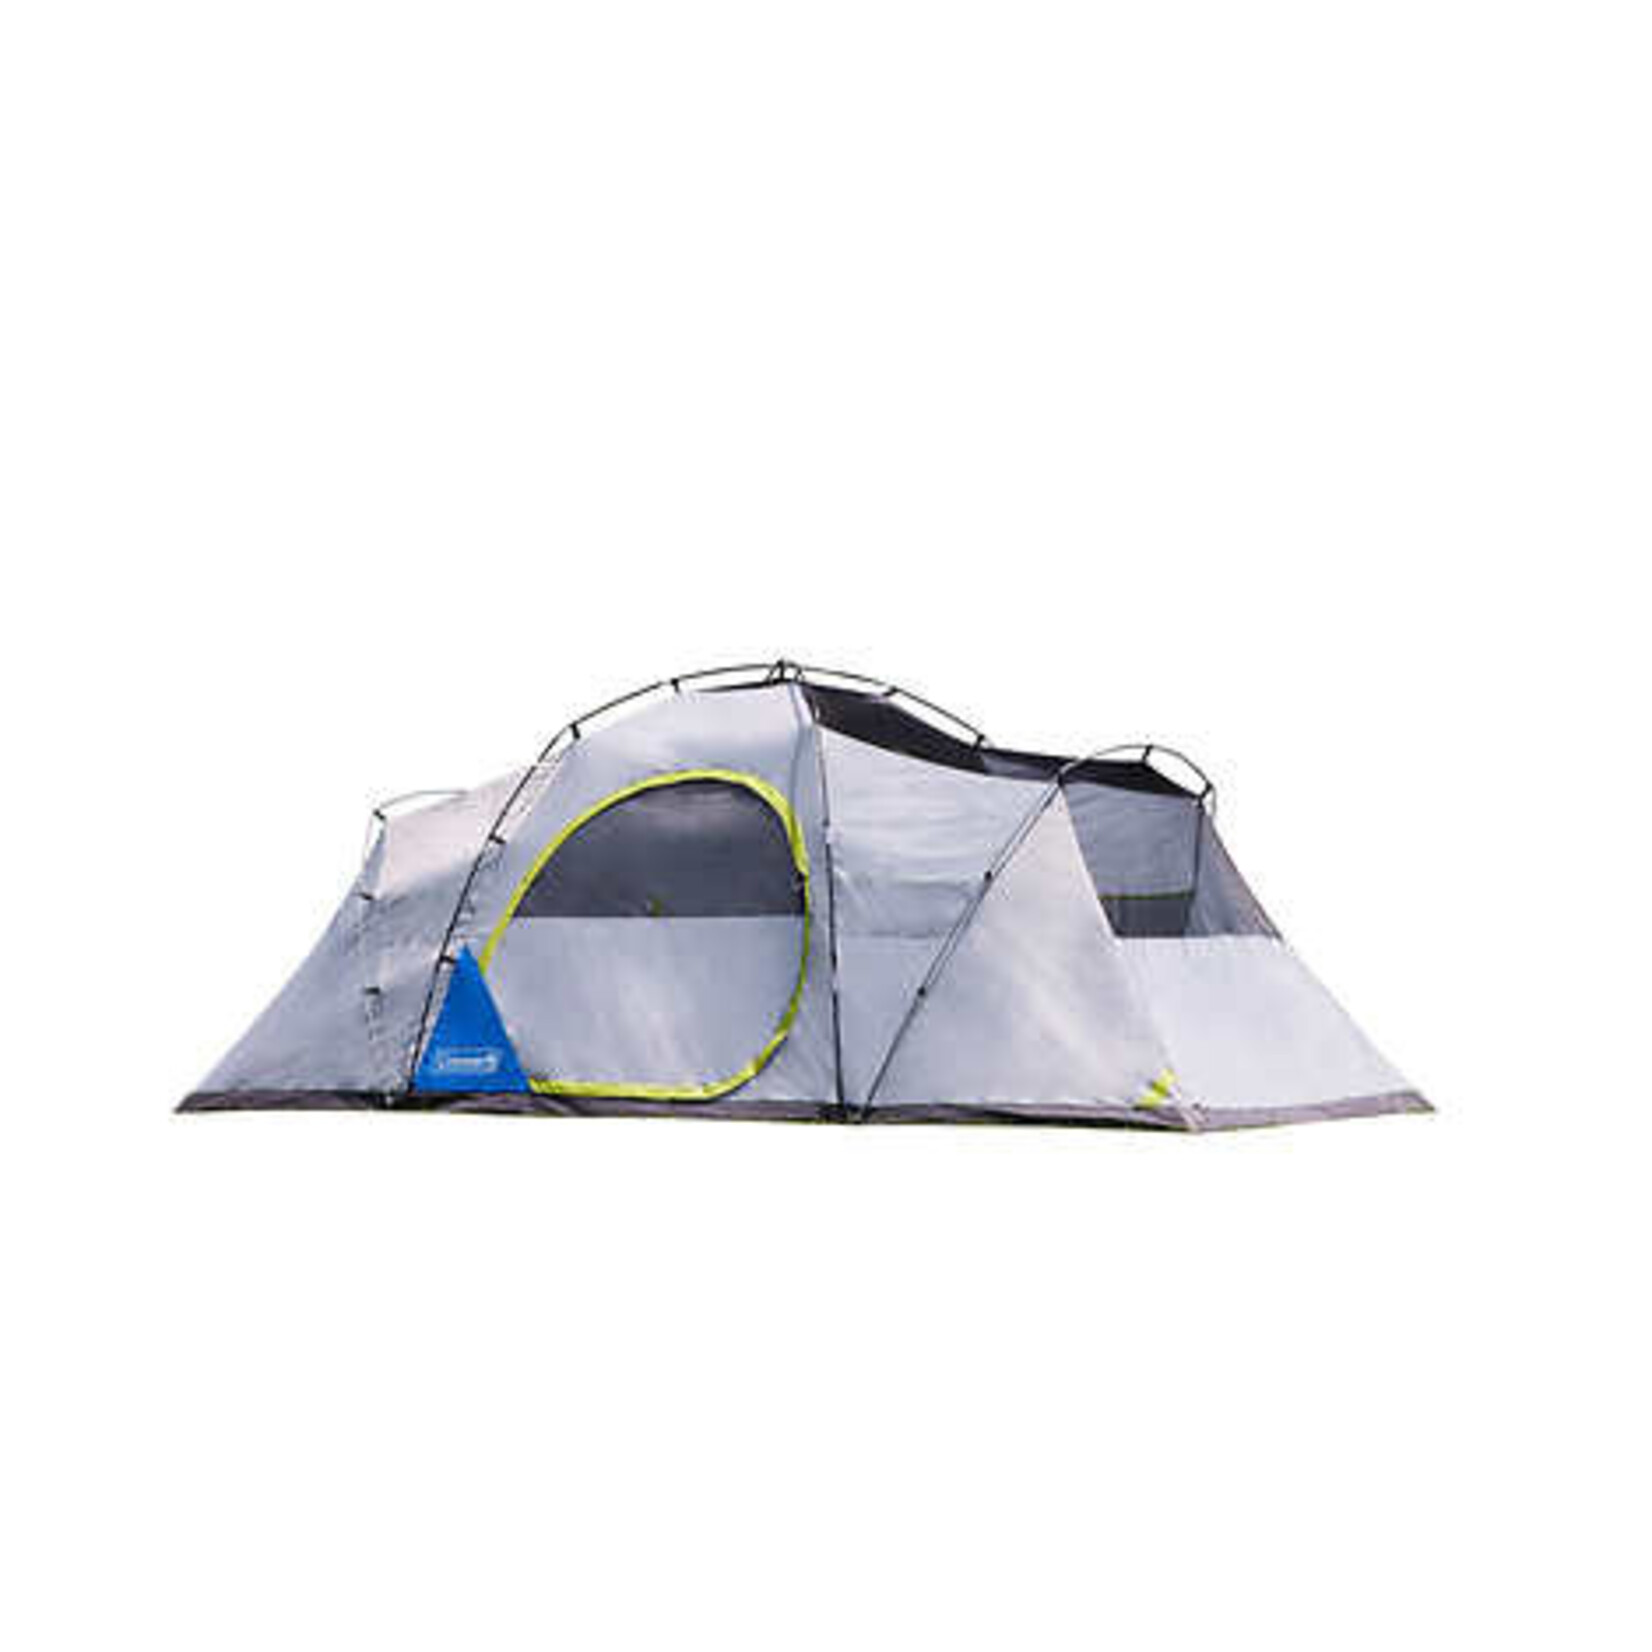 Coleman - Skydome XL Tent - 8 person